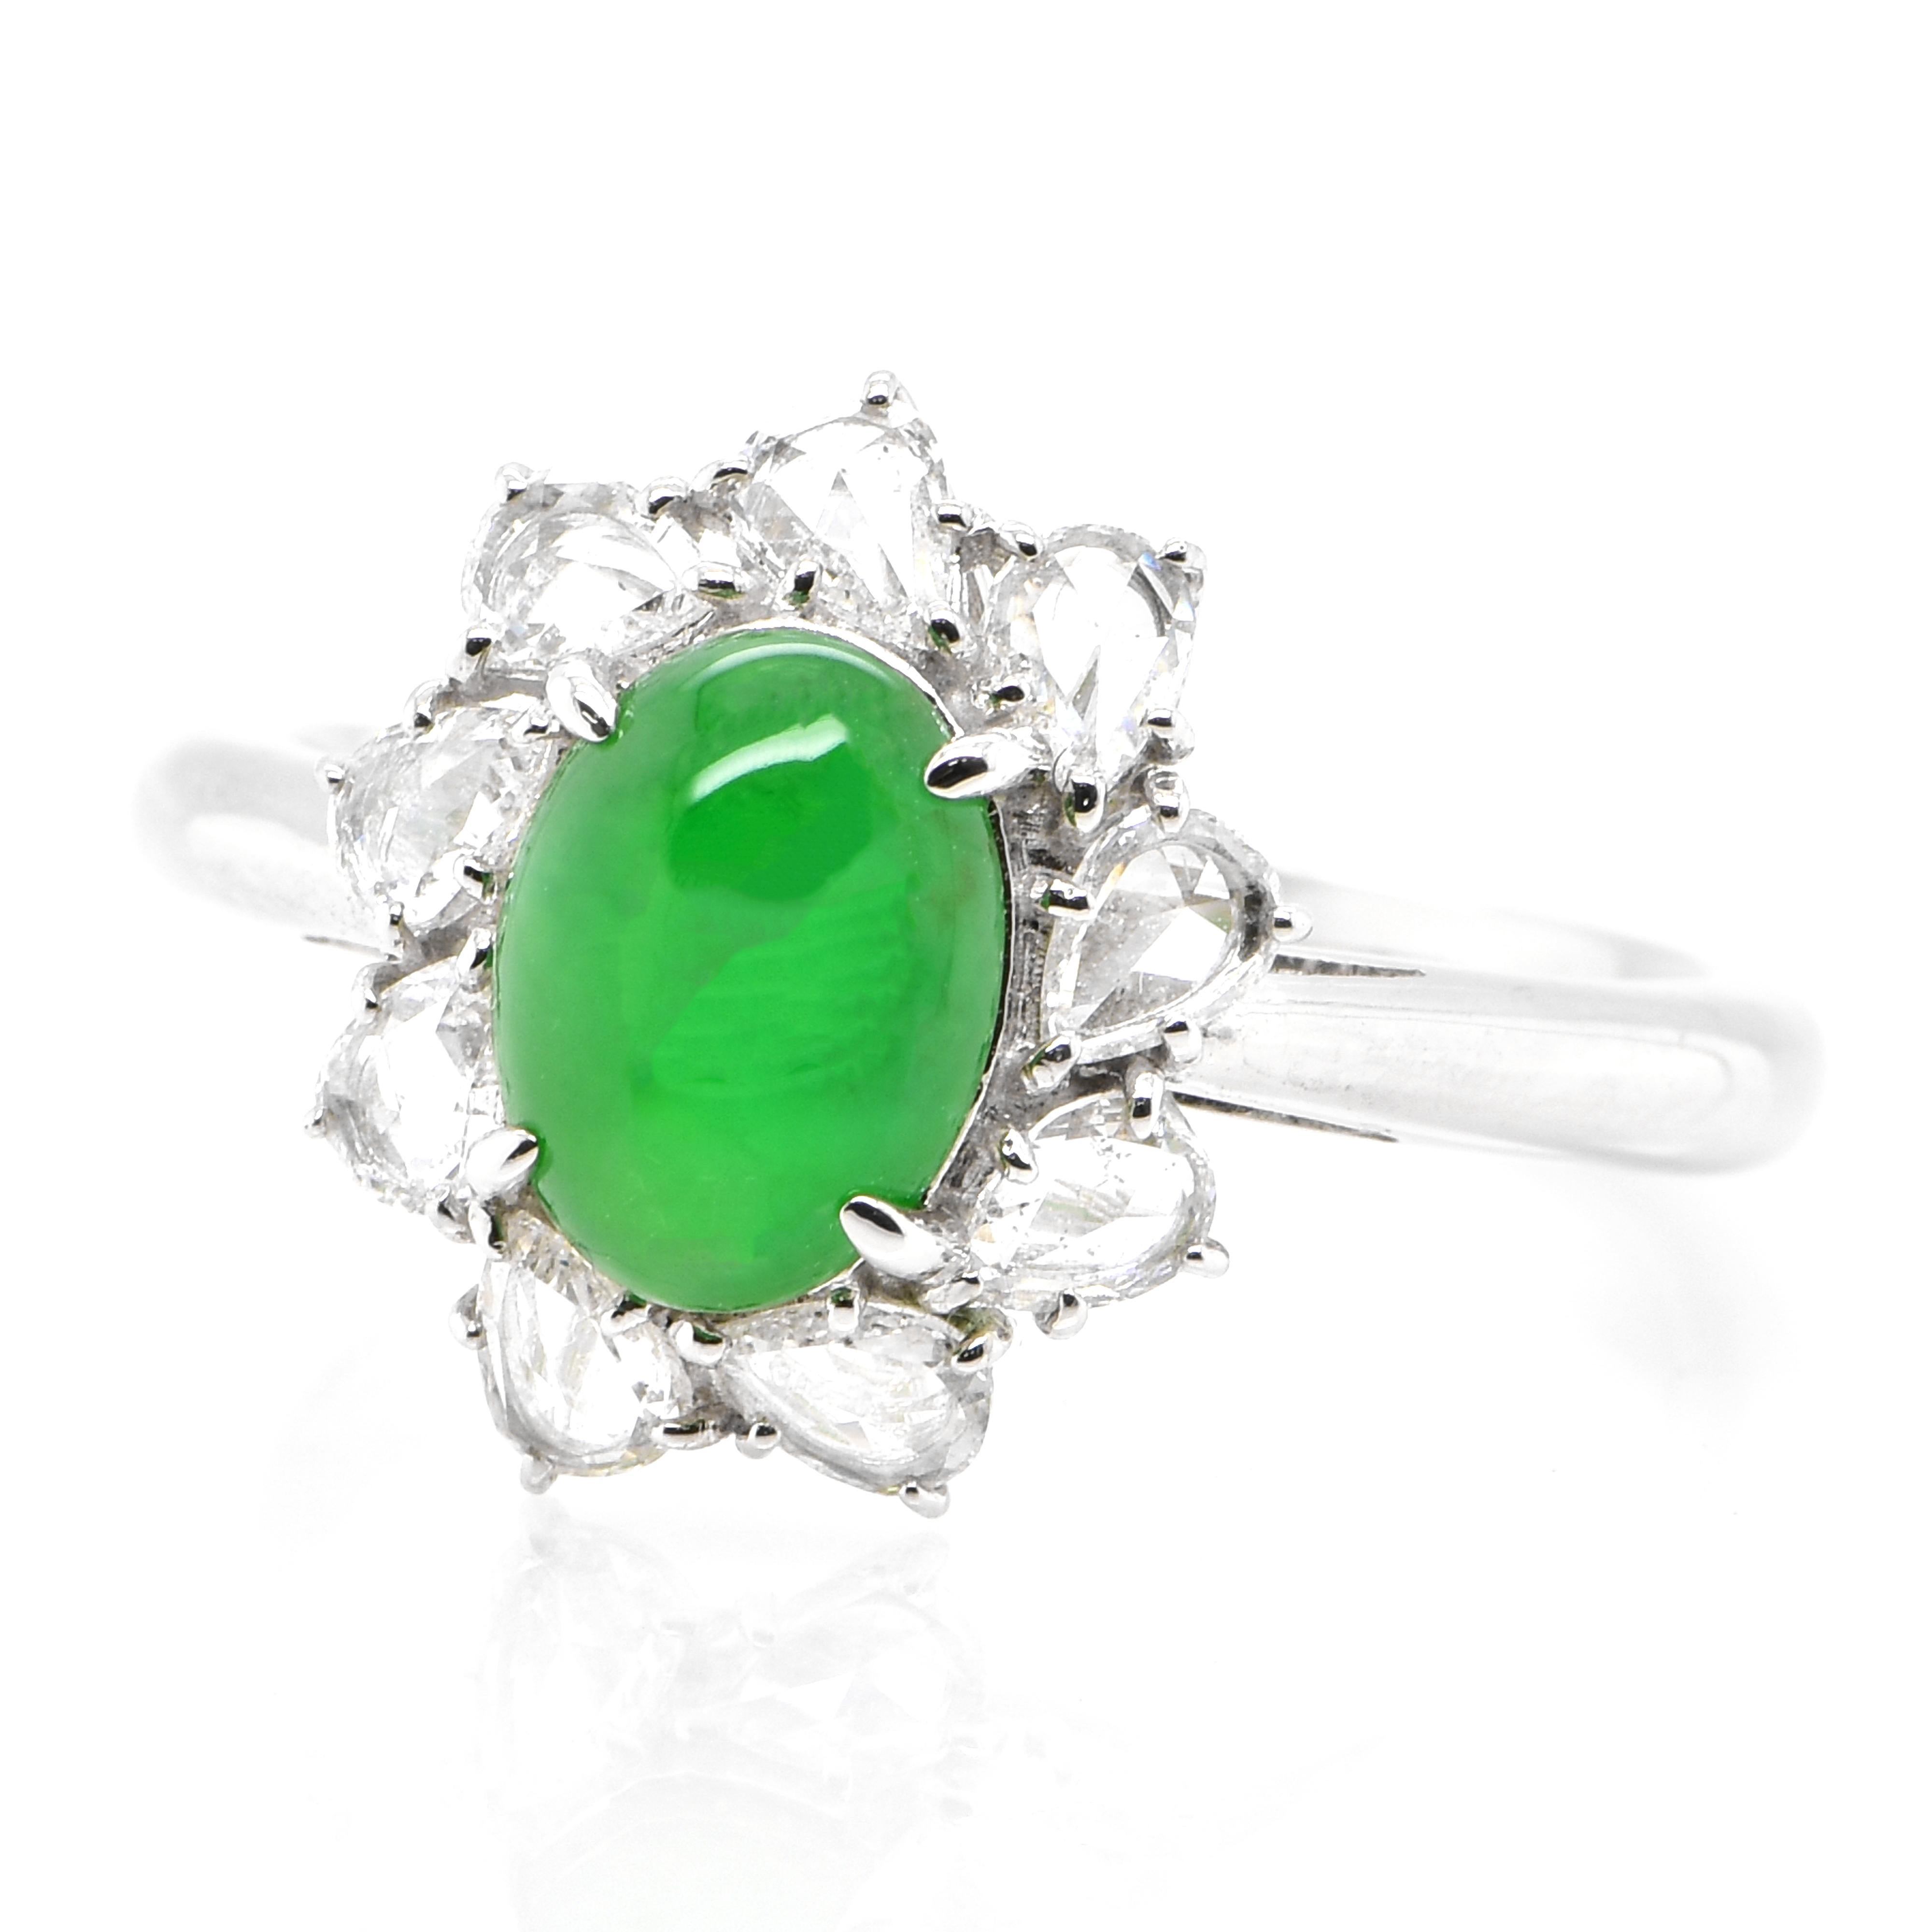 A beautiful Ring featuring a 1.302 Carat, Natural, Non-dyed Jadeite and 0.50 Carats of Diamond Accents set in Platinum. Jadeite has been cherished for millennia. Its nature is pure and enduring, yet sensuous and luxurious. Jadeite’s exceptional look